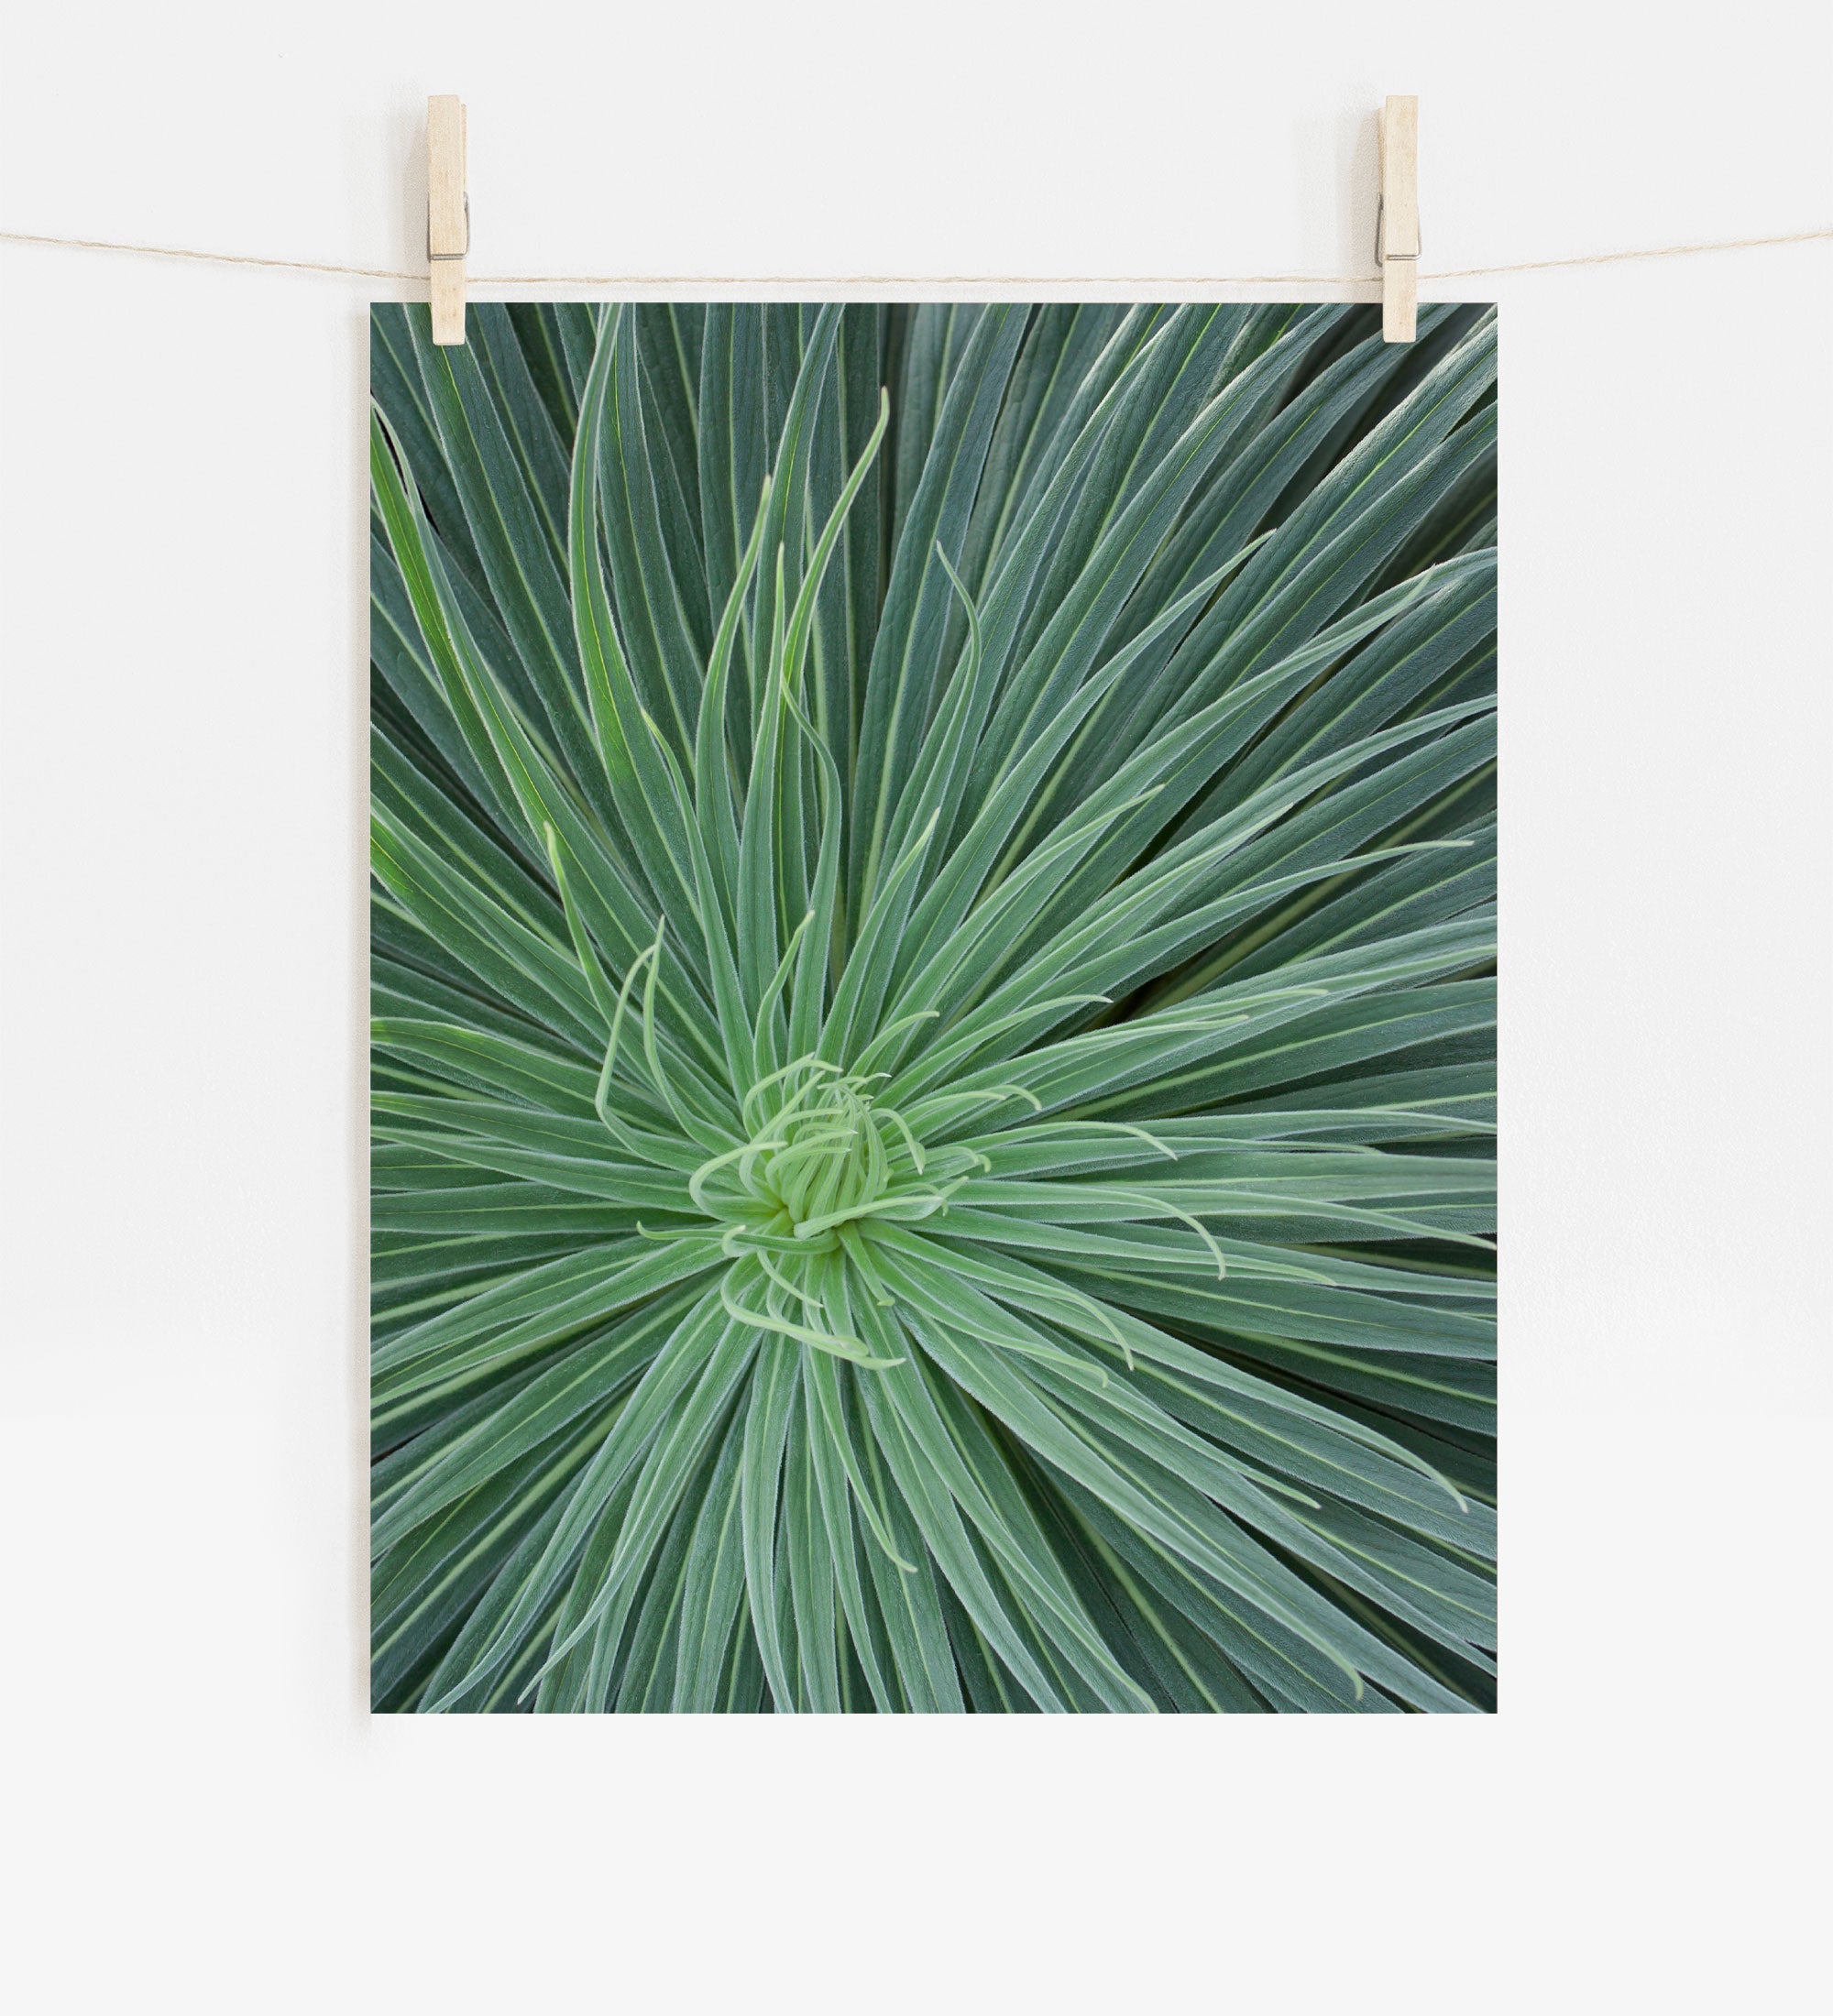 A photo of Offley Green&#39;s &#39;Desert Fireworks II&#39; green succulent with spiky leaves radiating from the center, displayed hanging on a clothesline by wooden clips, printed on archival photographic paper.